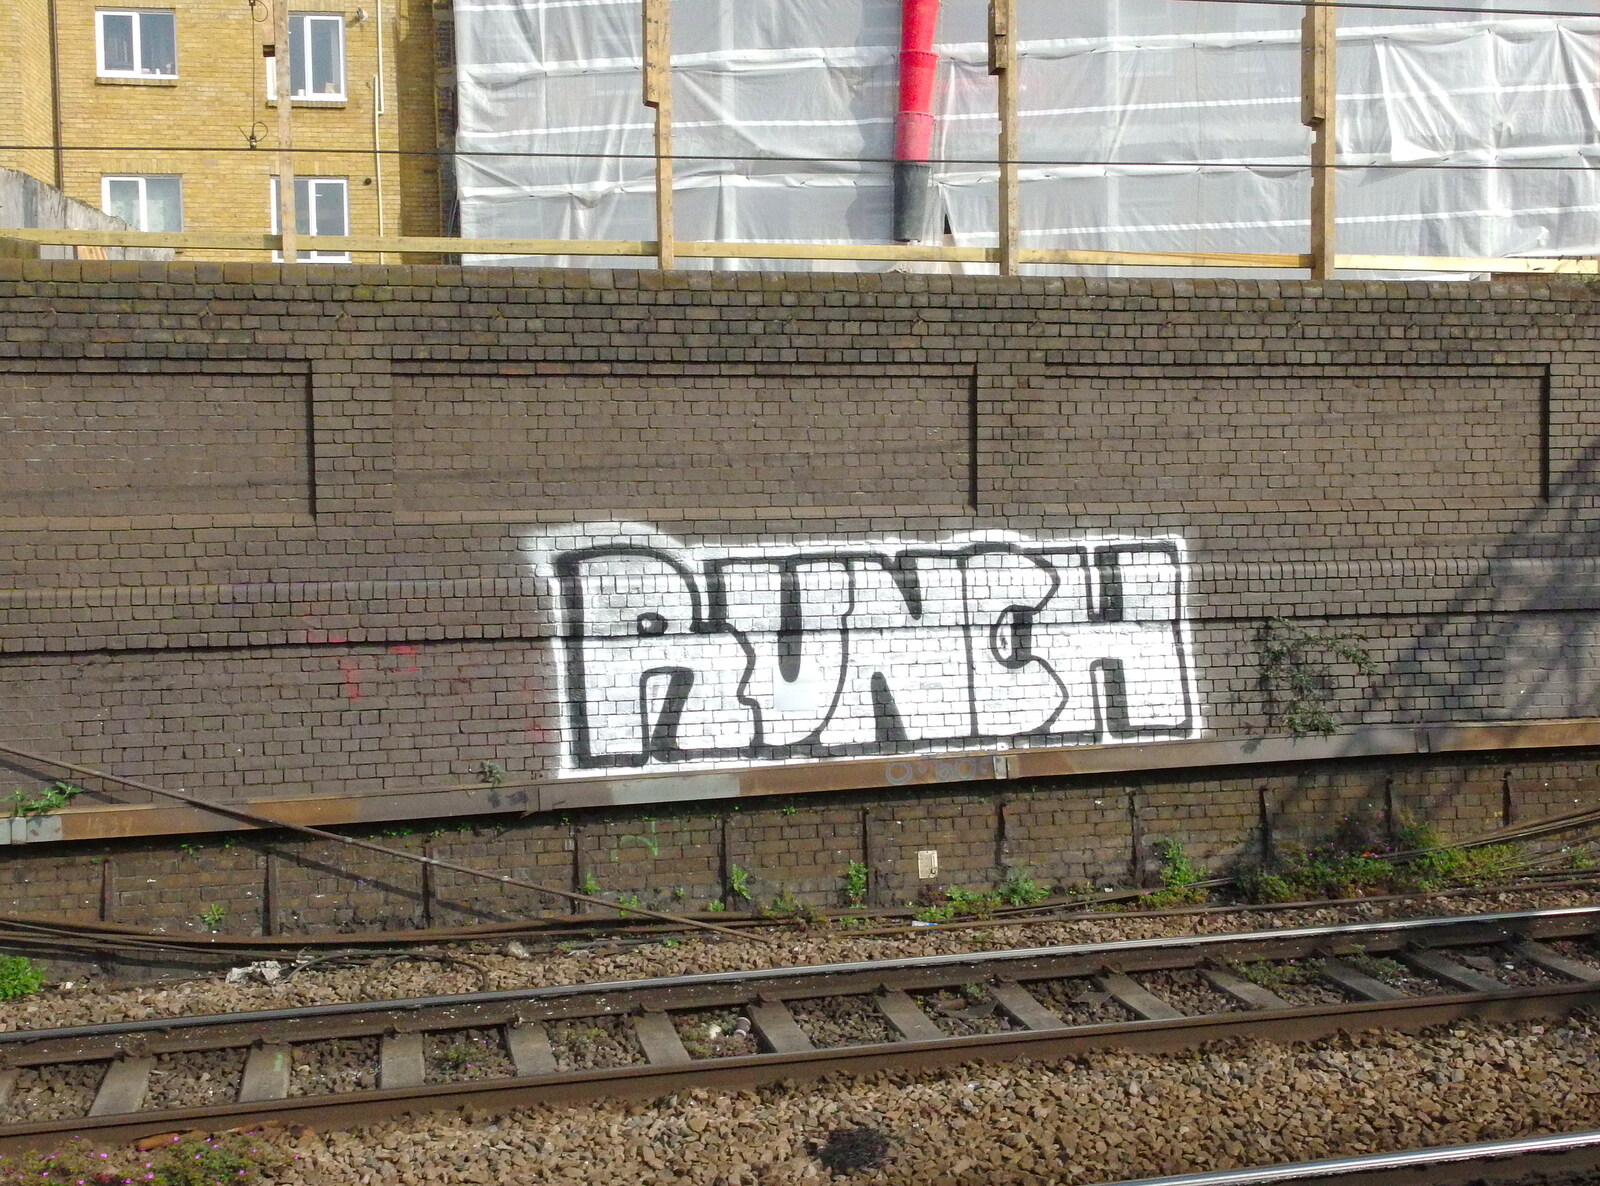 Another Runch tag from A Trainey Sort of Week, Liverpool Street, City of London - 3rd April 2014